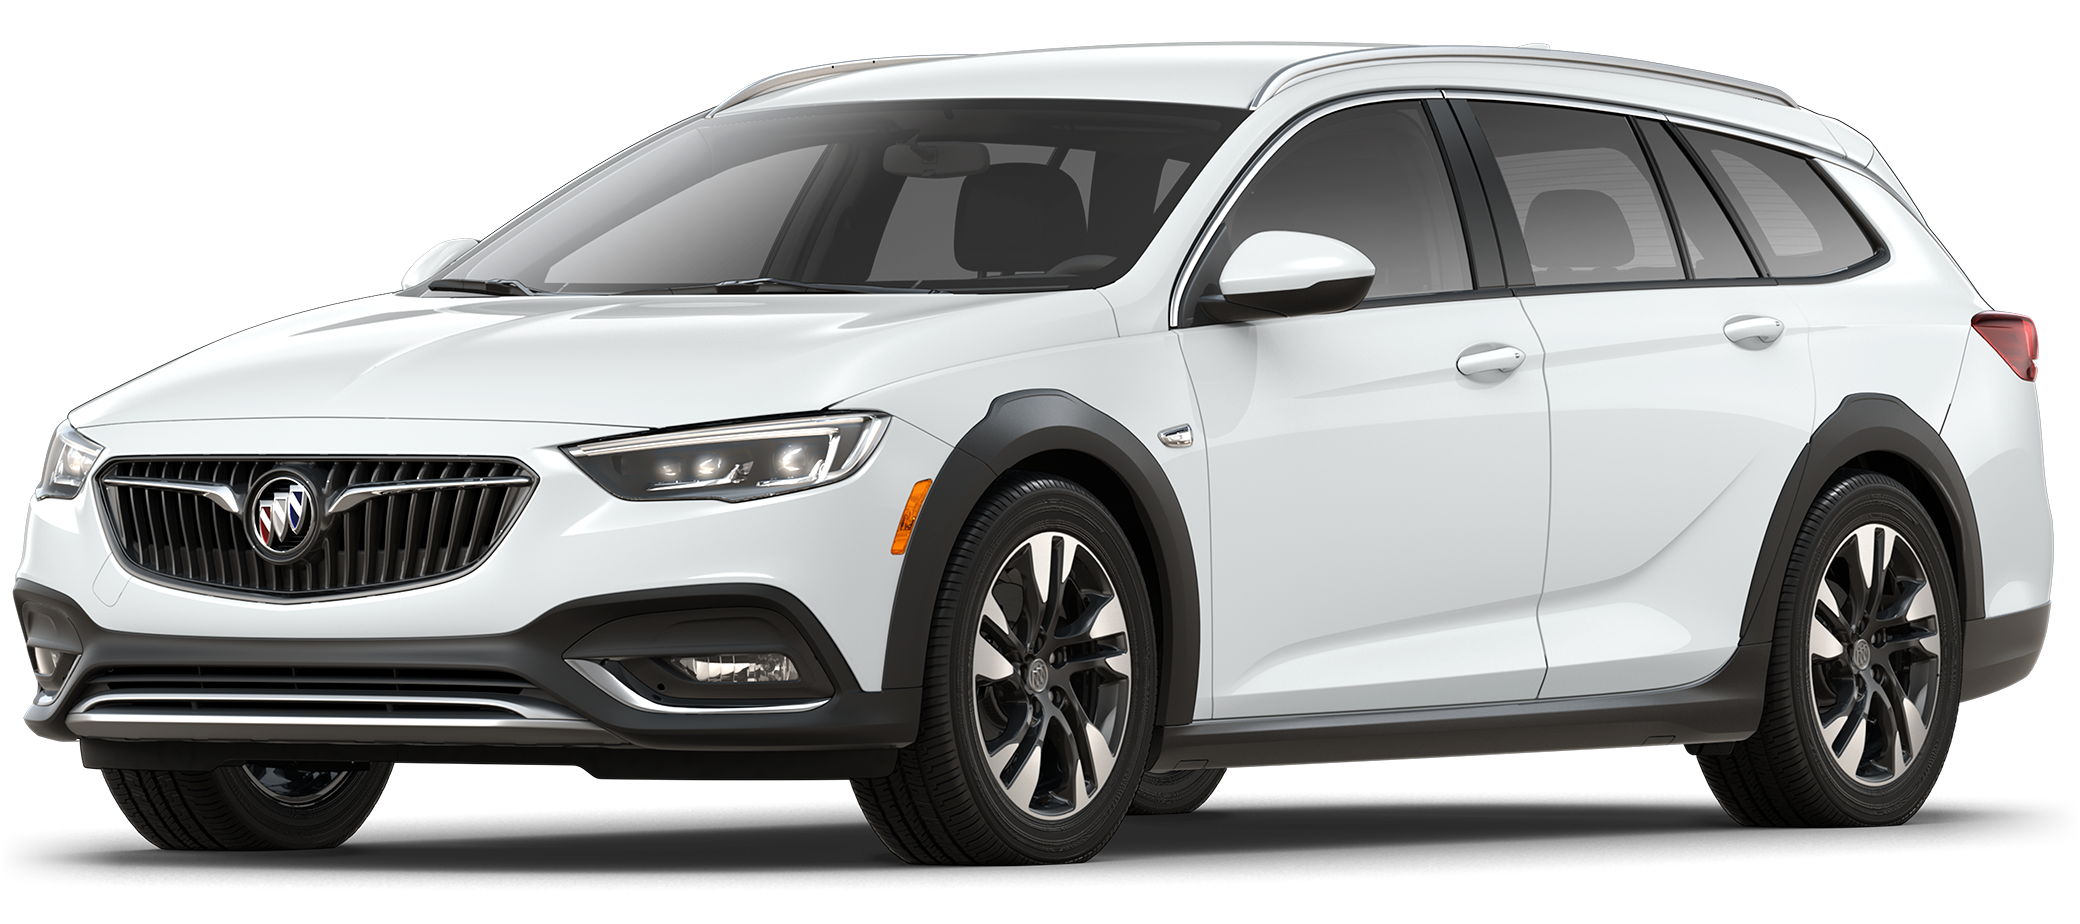 2020-buick-regal-tourx-incentives-specials-offers-in-souderton-pa